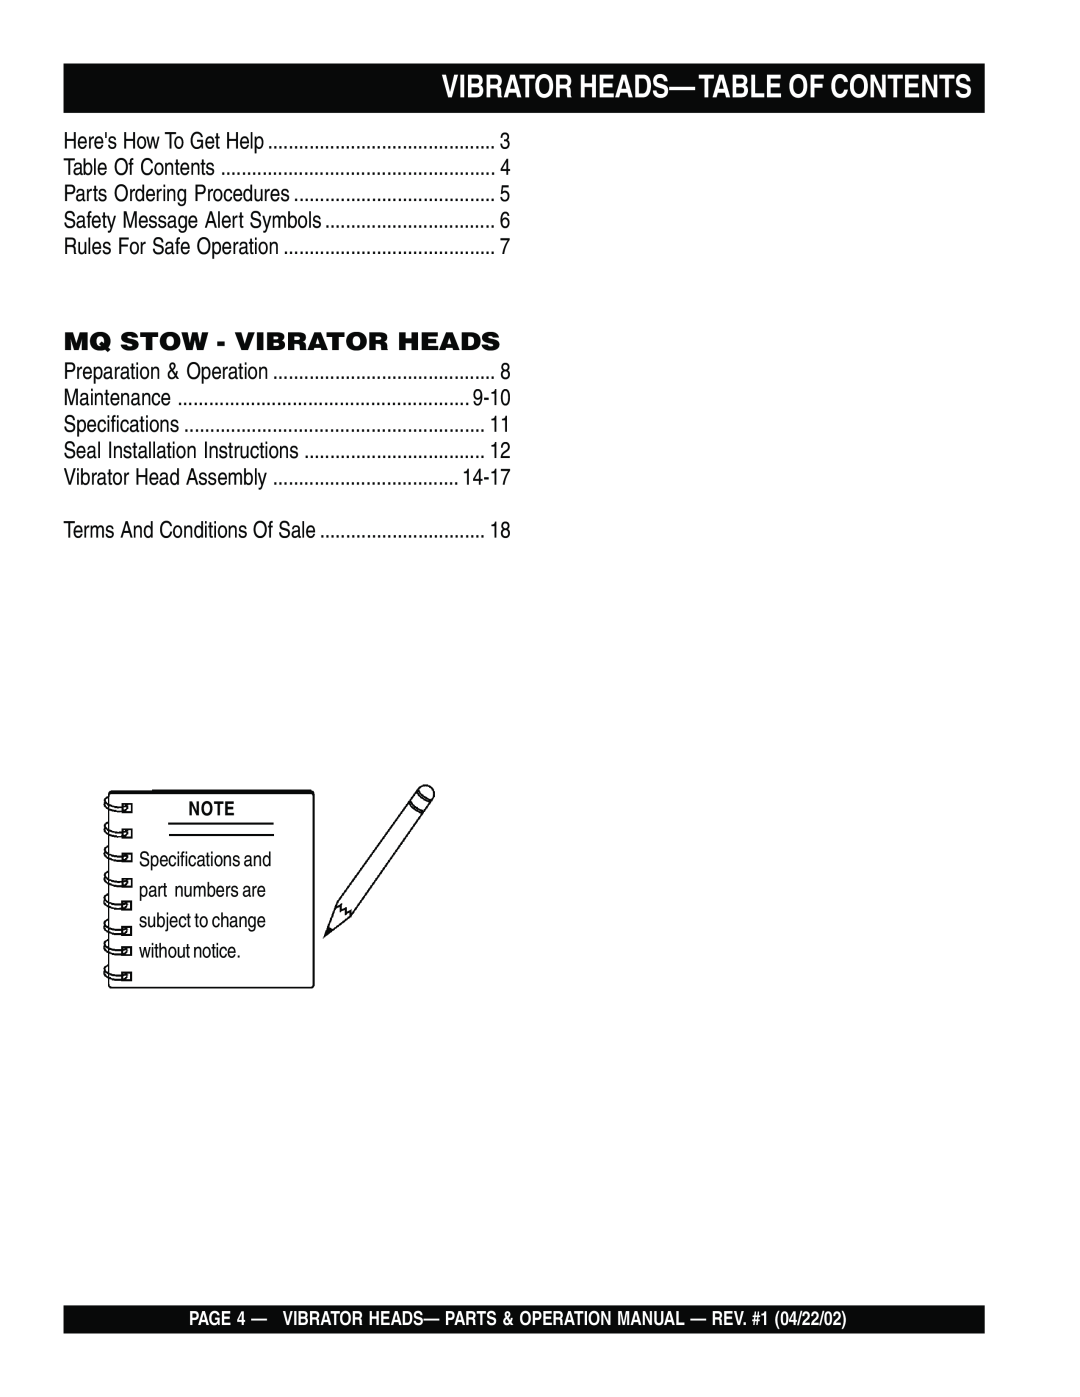 Stow 1300, 2600, 900 PAGE 4 - VIBRATOR HEADS- PARTS & OPERATION MANUAL - REV. #1 04/22/02, Mq Stow - Vibrator Heads, 9-10 